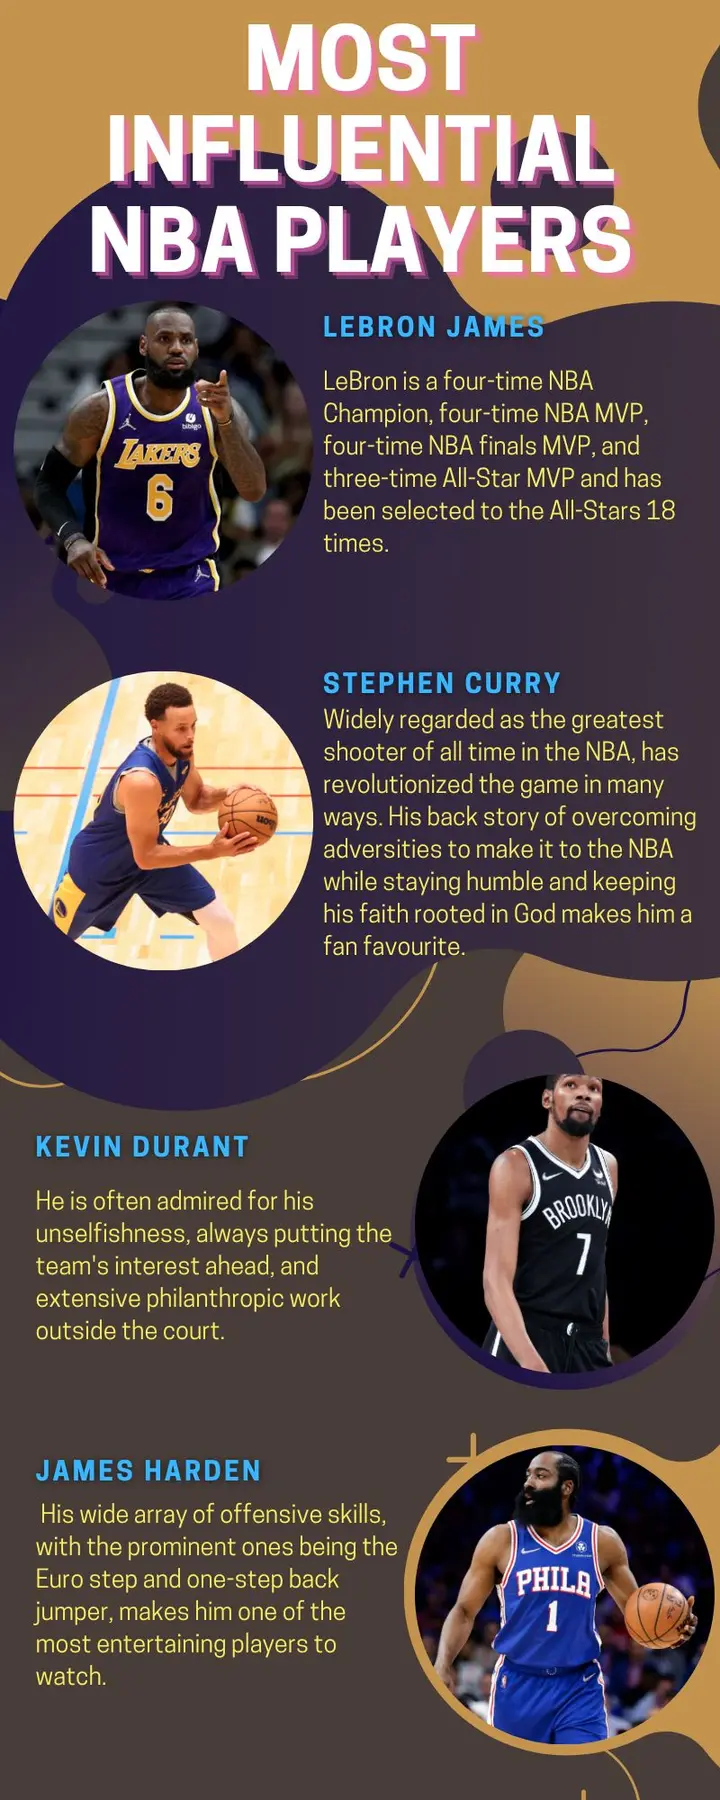 Best NBA Players of the Decade